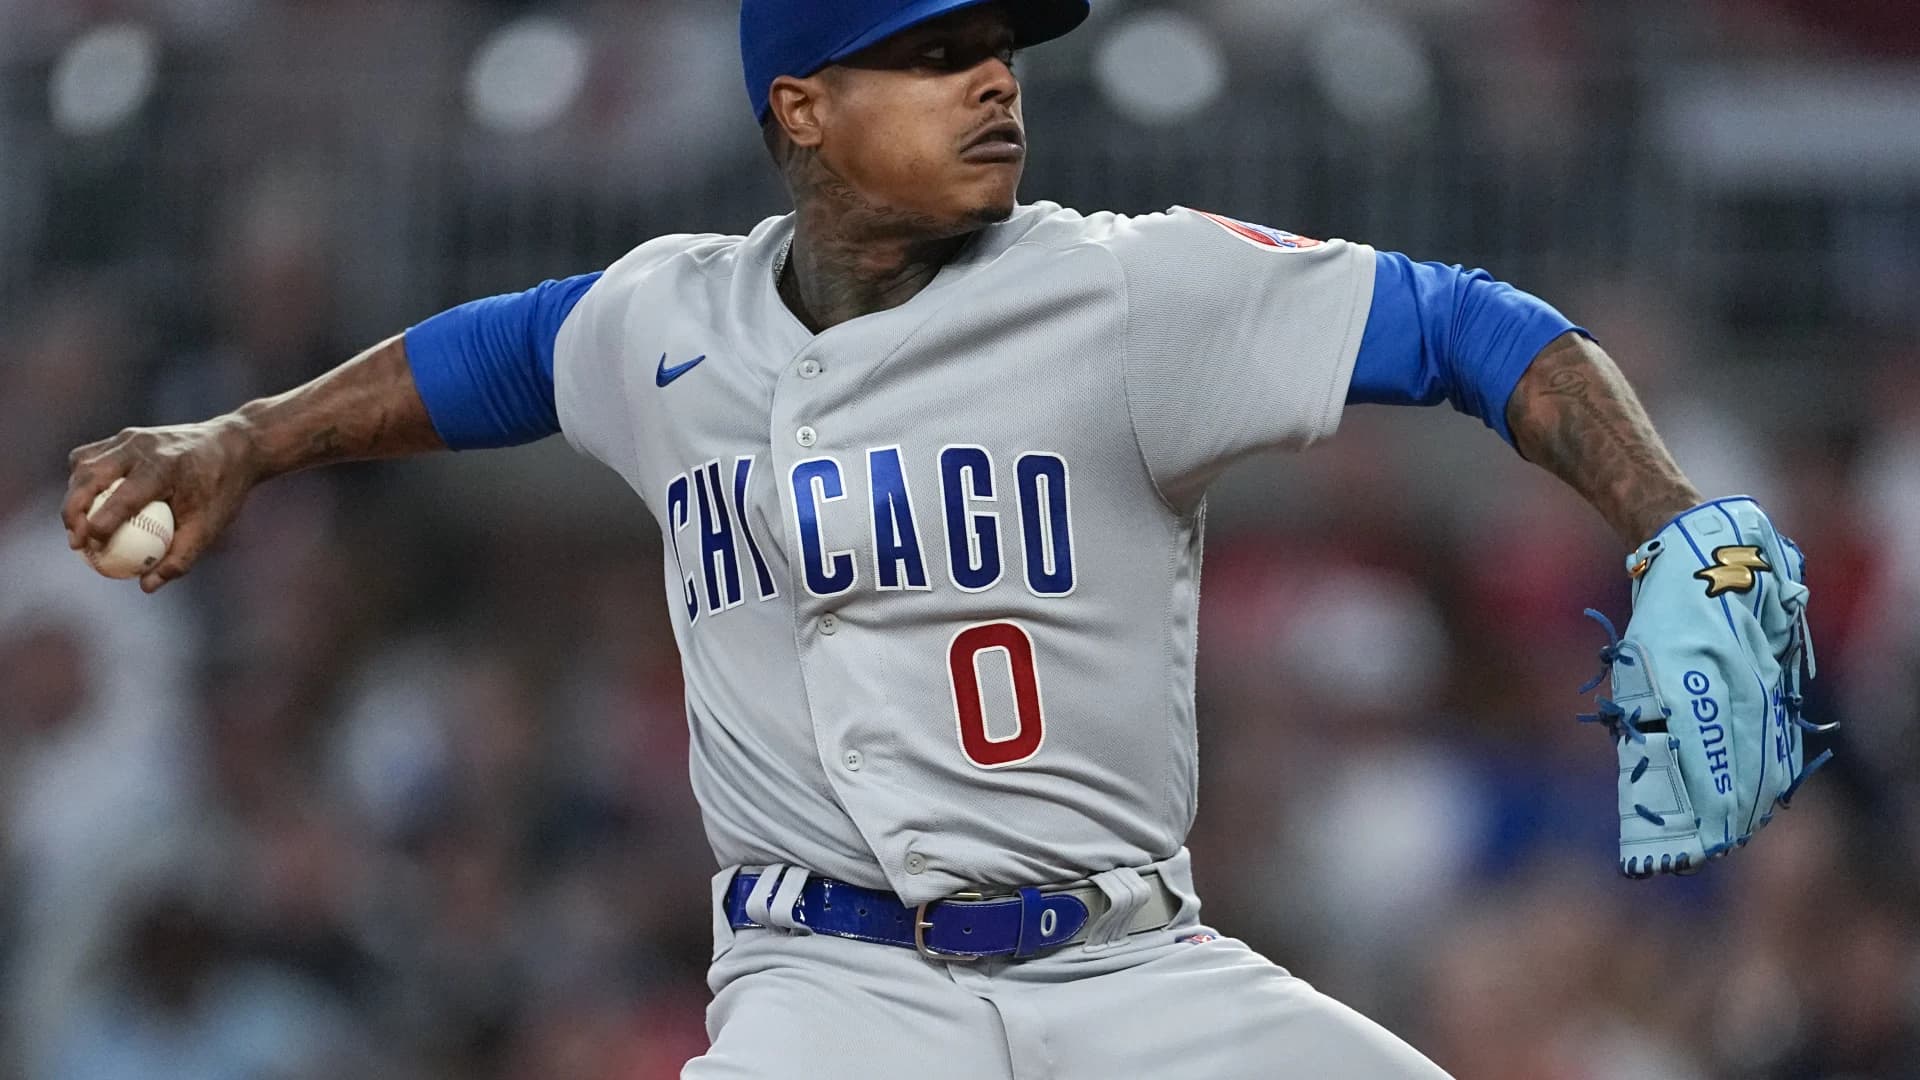 'Brings out the best in me.' Medford's Marcus Stroman says he's ready for bright lights of Yankee Stadium